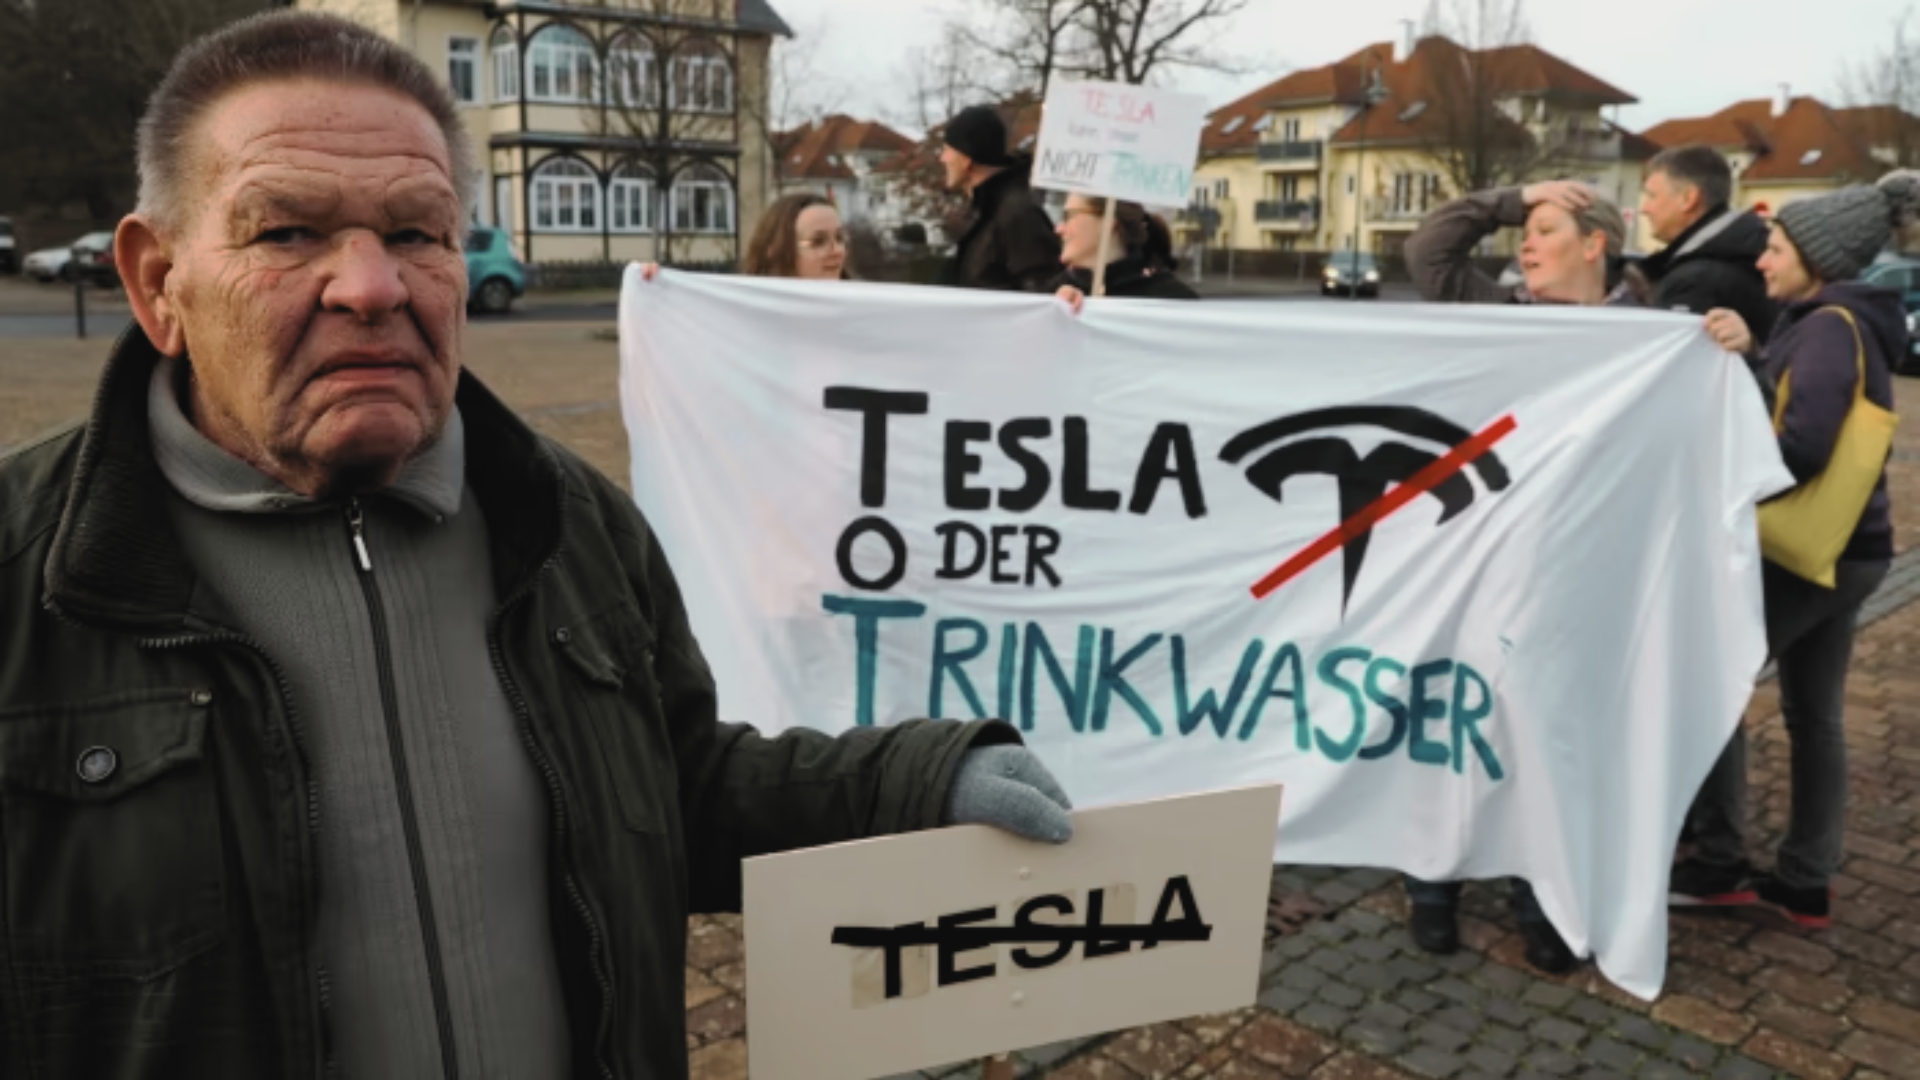 Nearly 800 Demonstrators Protest Tesla Gigafactory Expansion in Germany, Adding To Elon Musk’s Challenges